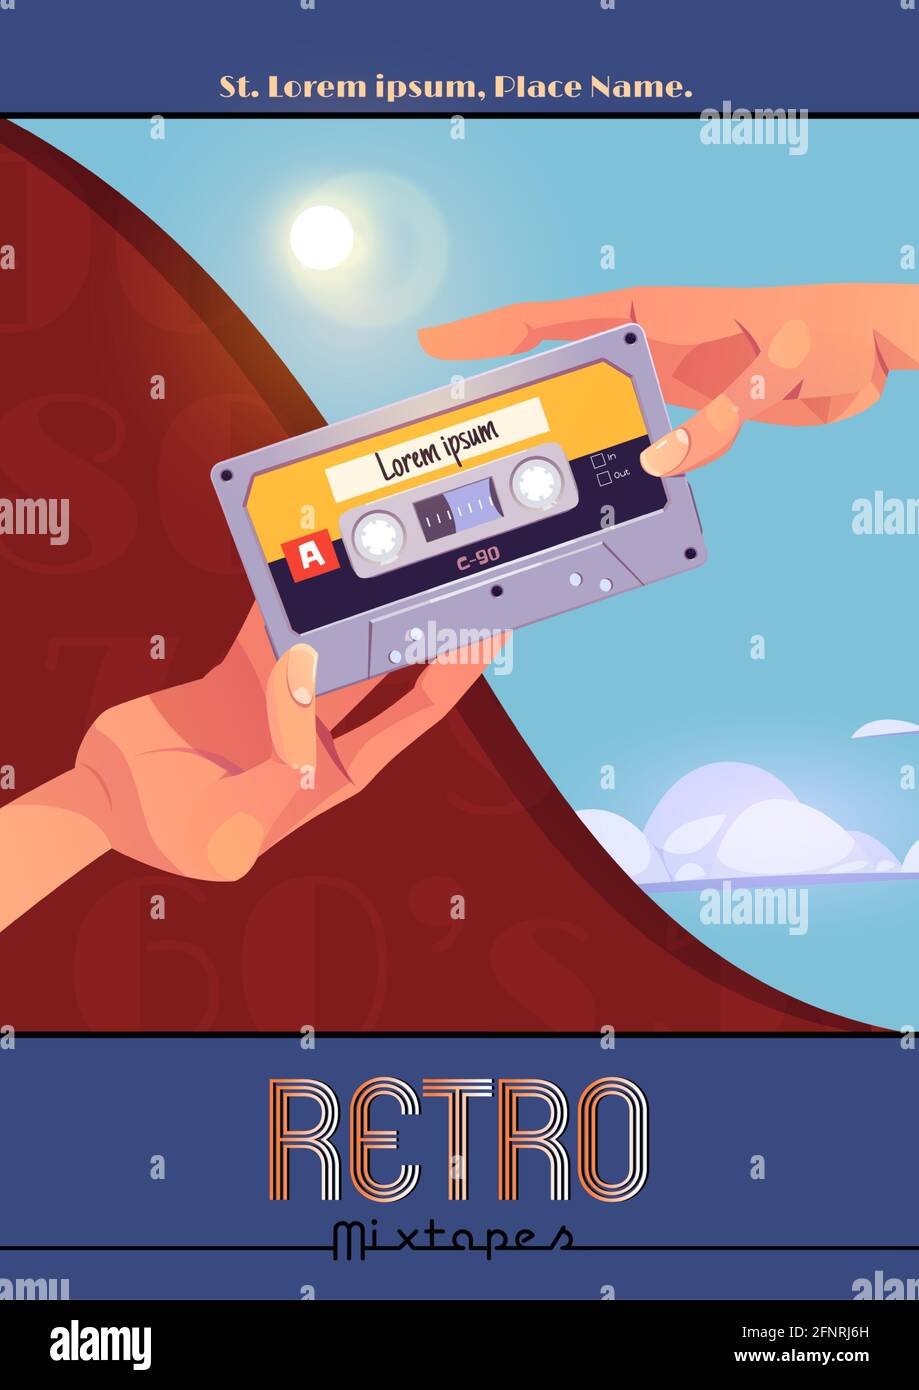 Retro mixtape poster with hands holding vintage audio cassette. Mix of pop and dance music of 80s. Vector banner with cartoon illustration of exchange or present old audio tapes Stock Vector